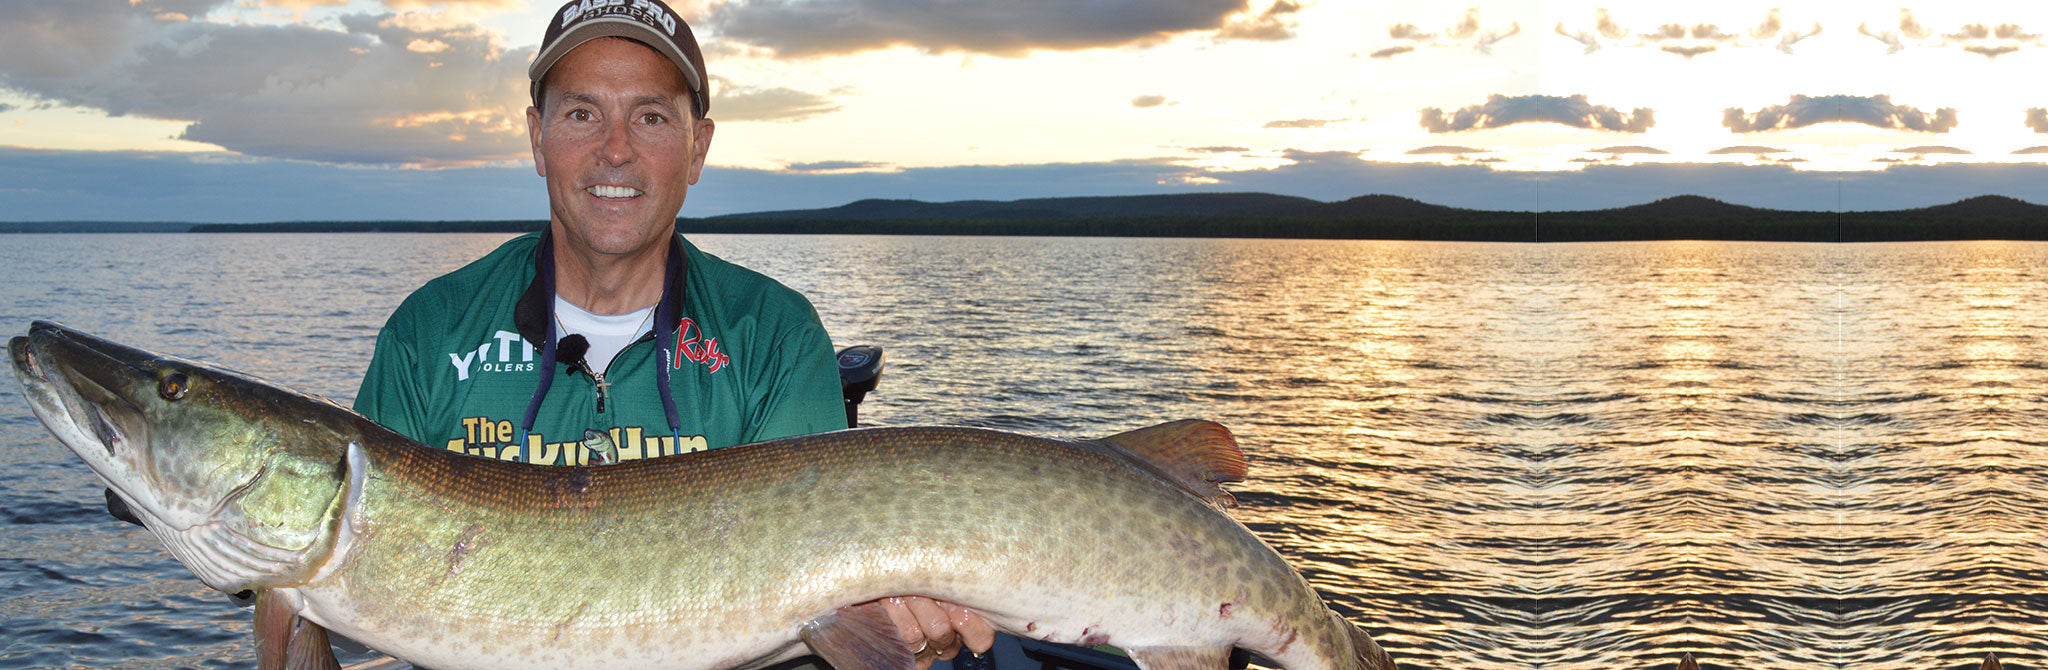 Giant musky being held by professional Muskie fisherman while using Dubro fishing accessories